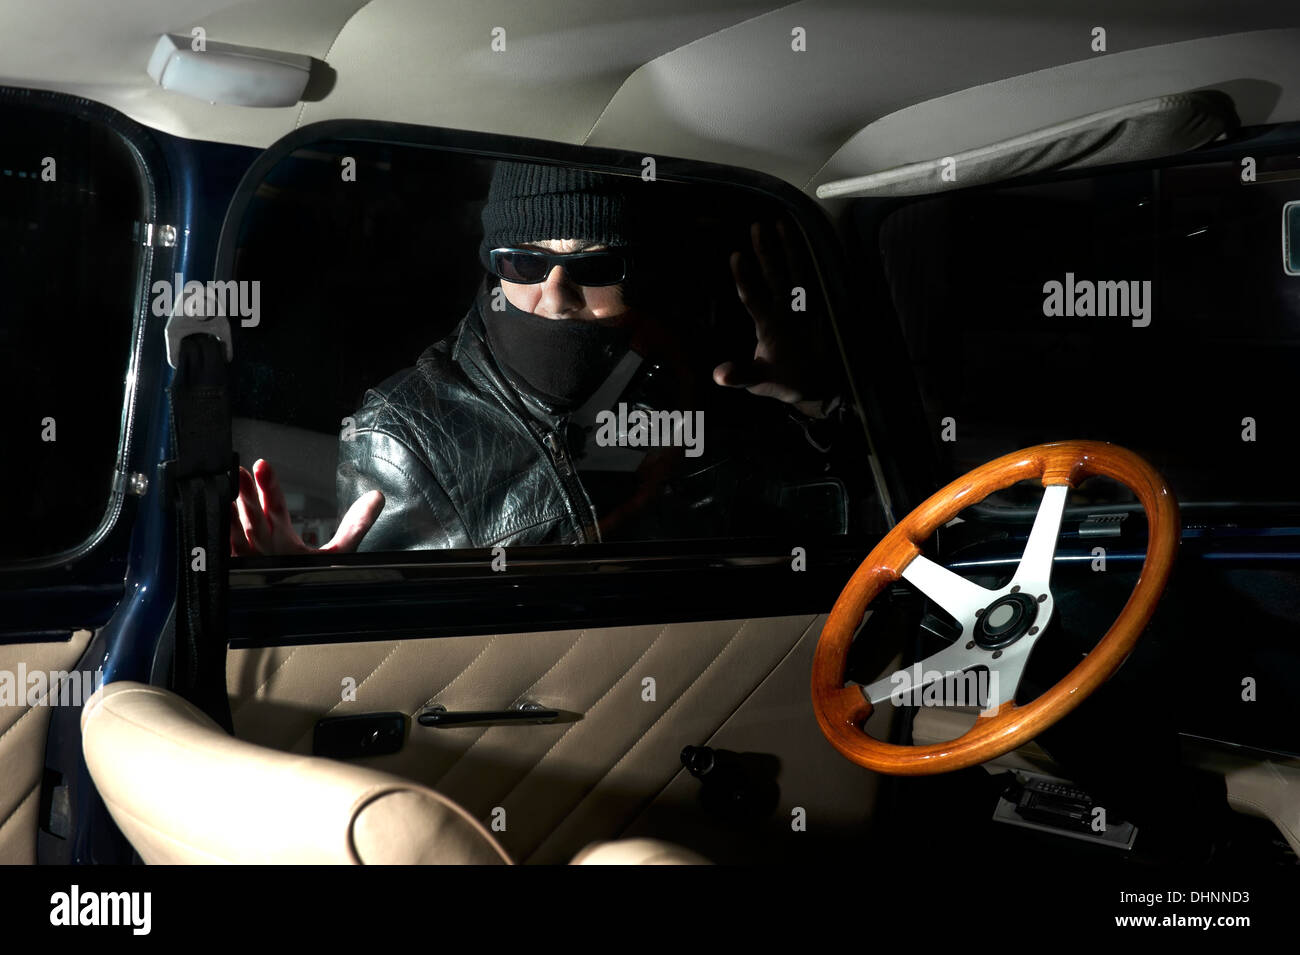 Thief trying to steal a car Stock Photo